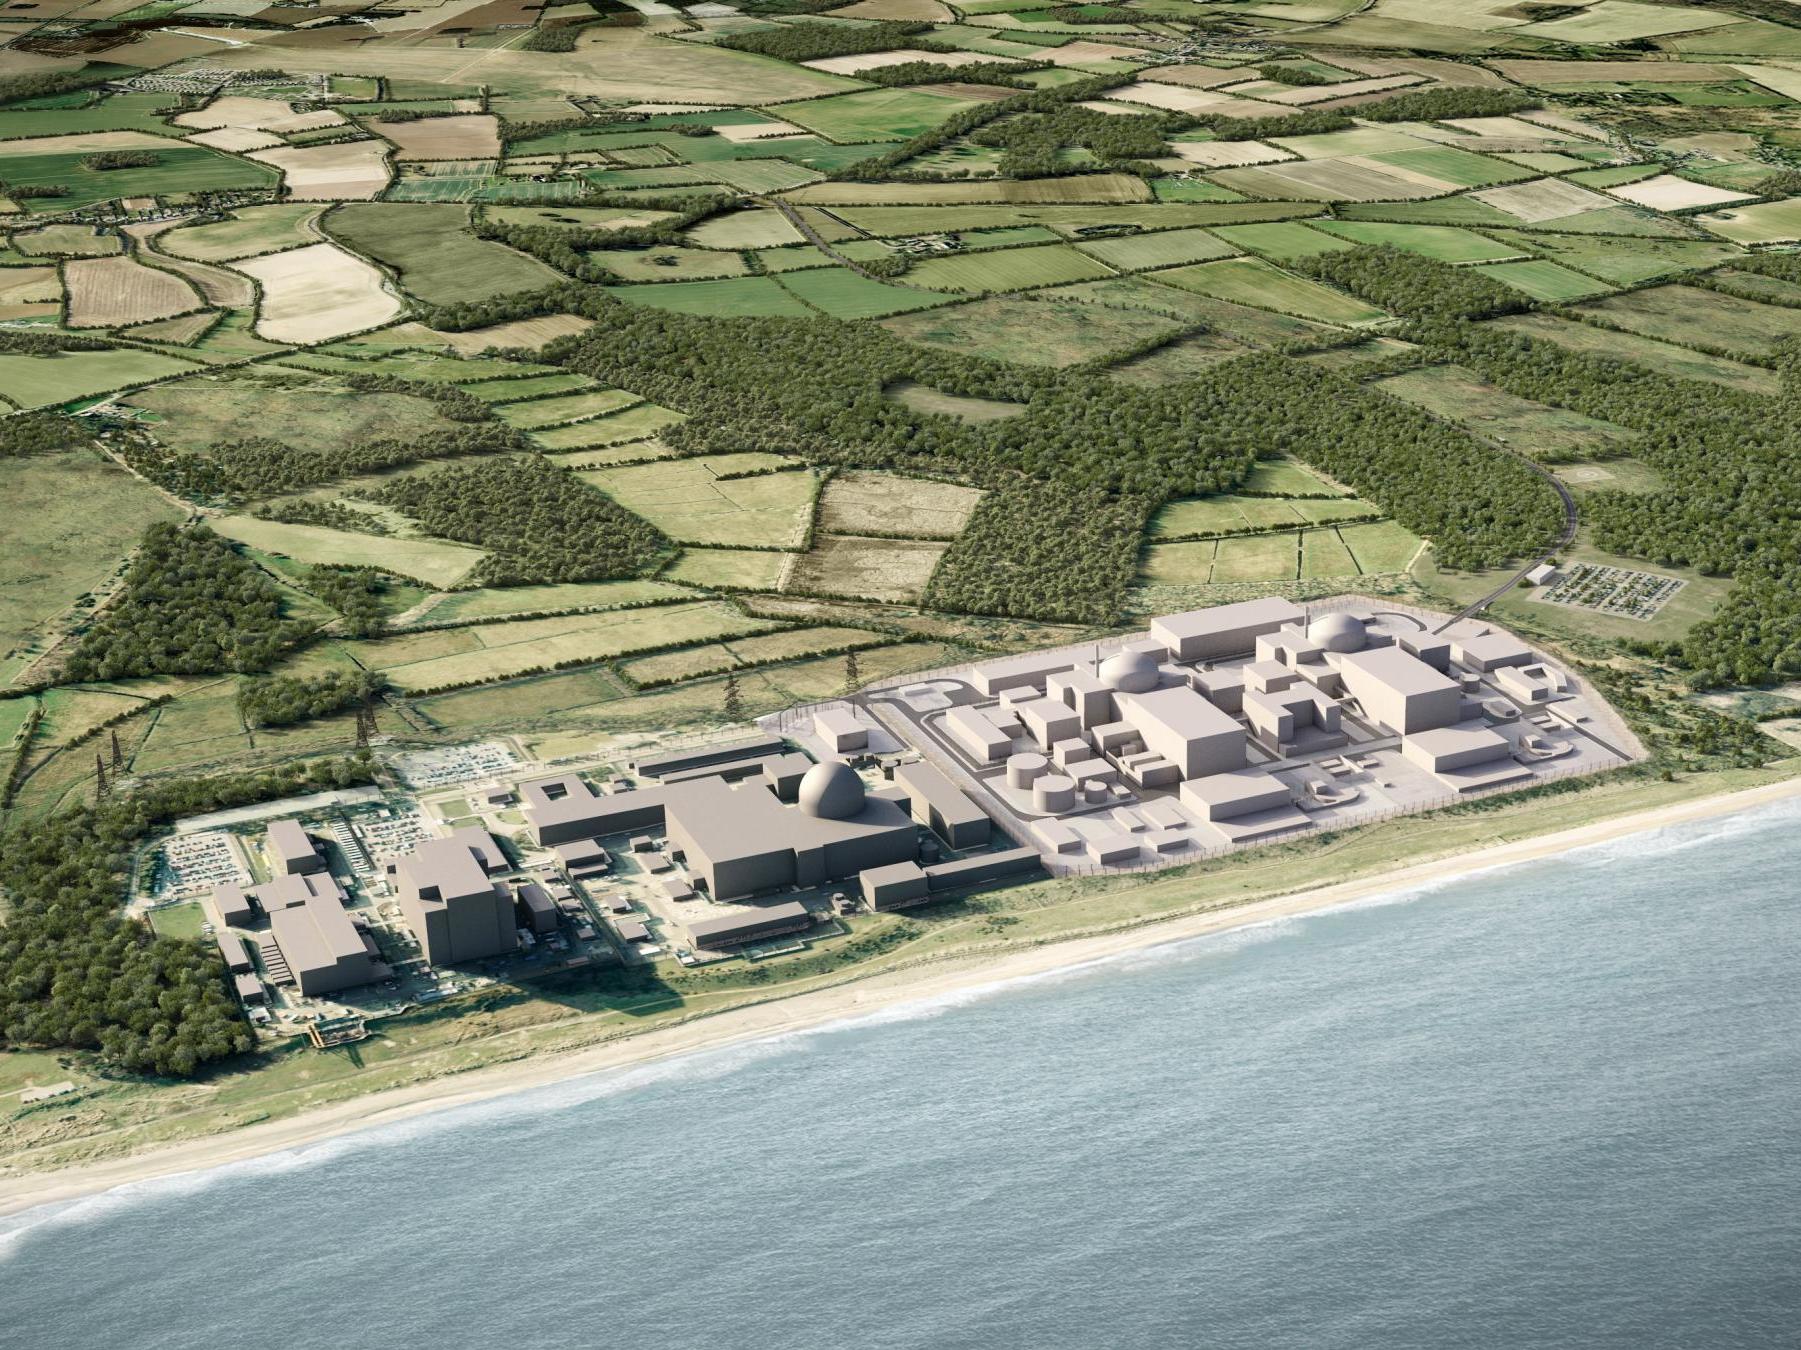 New nuclear power plant planned for Suffolk coast 'would be devastating' for wildlife